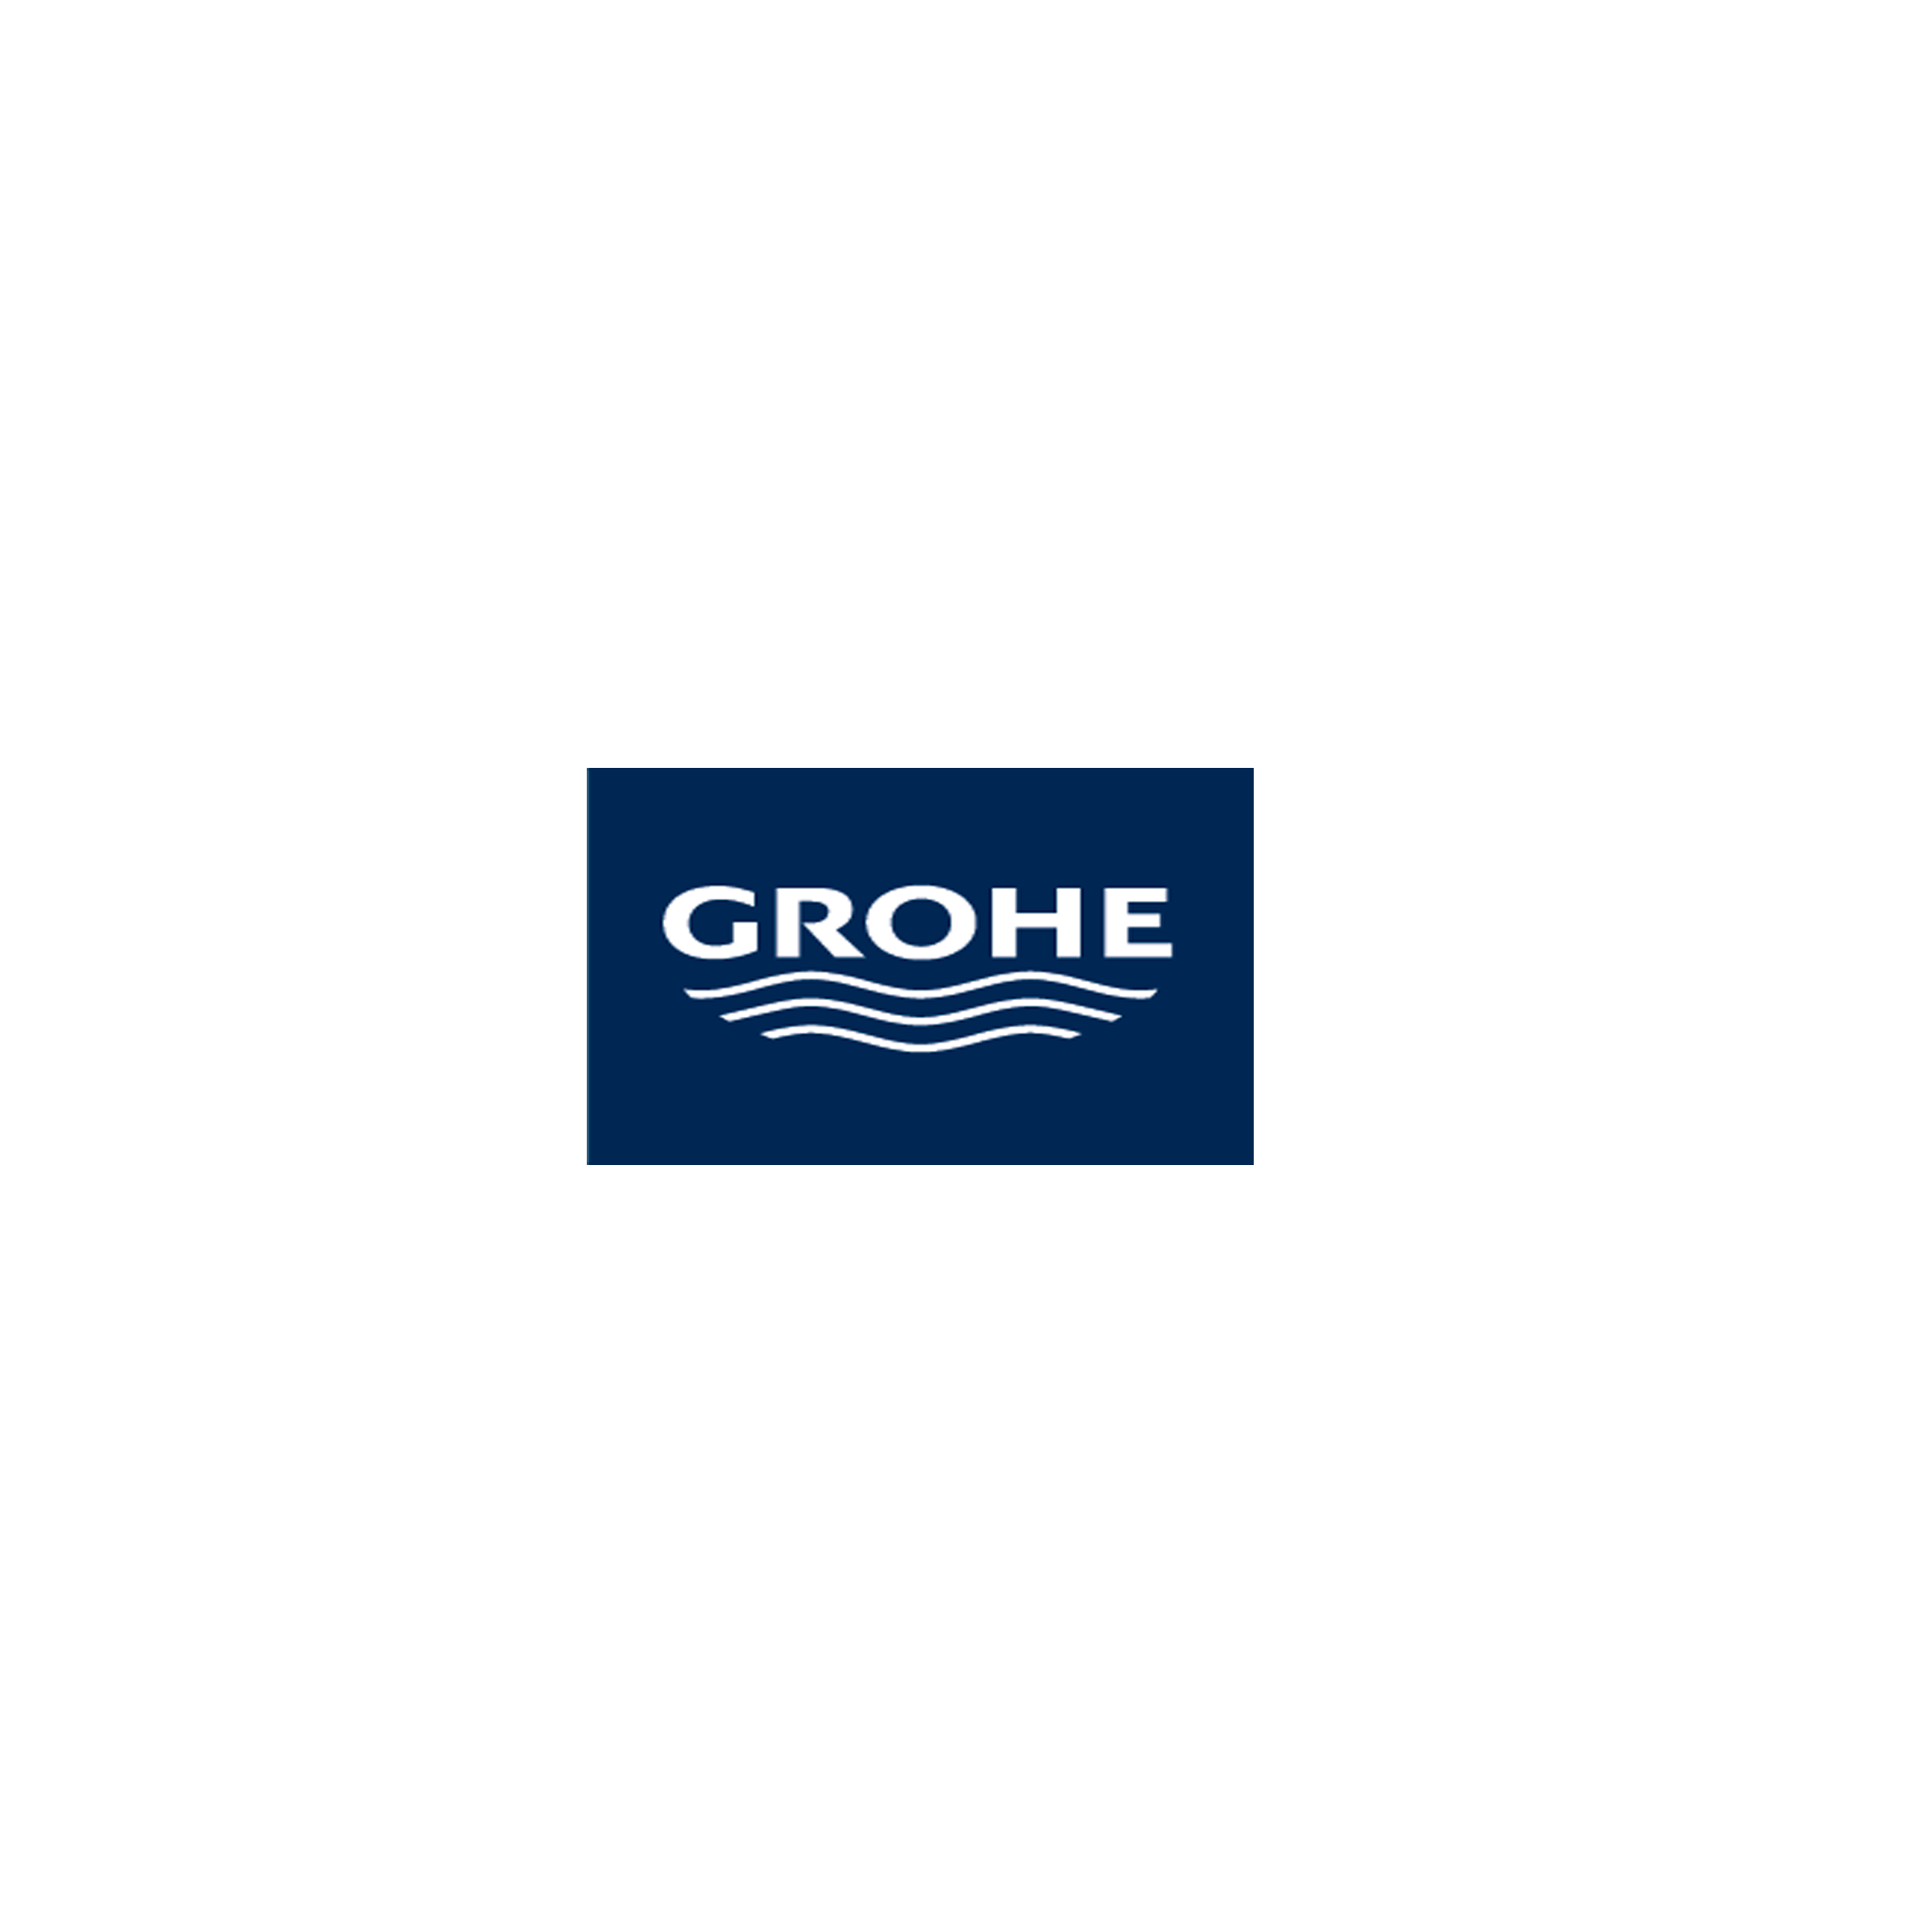 GROHE X Introduction by GROHE Team - YouTube